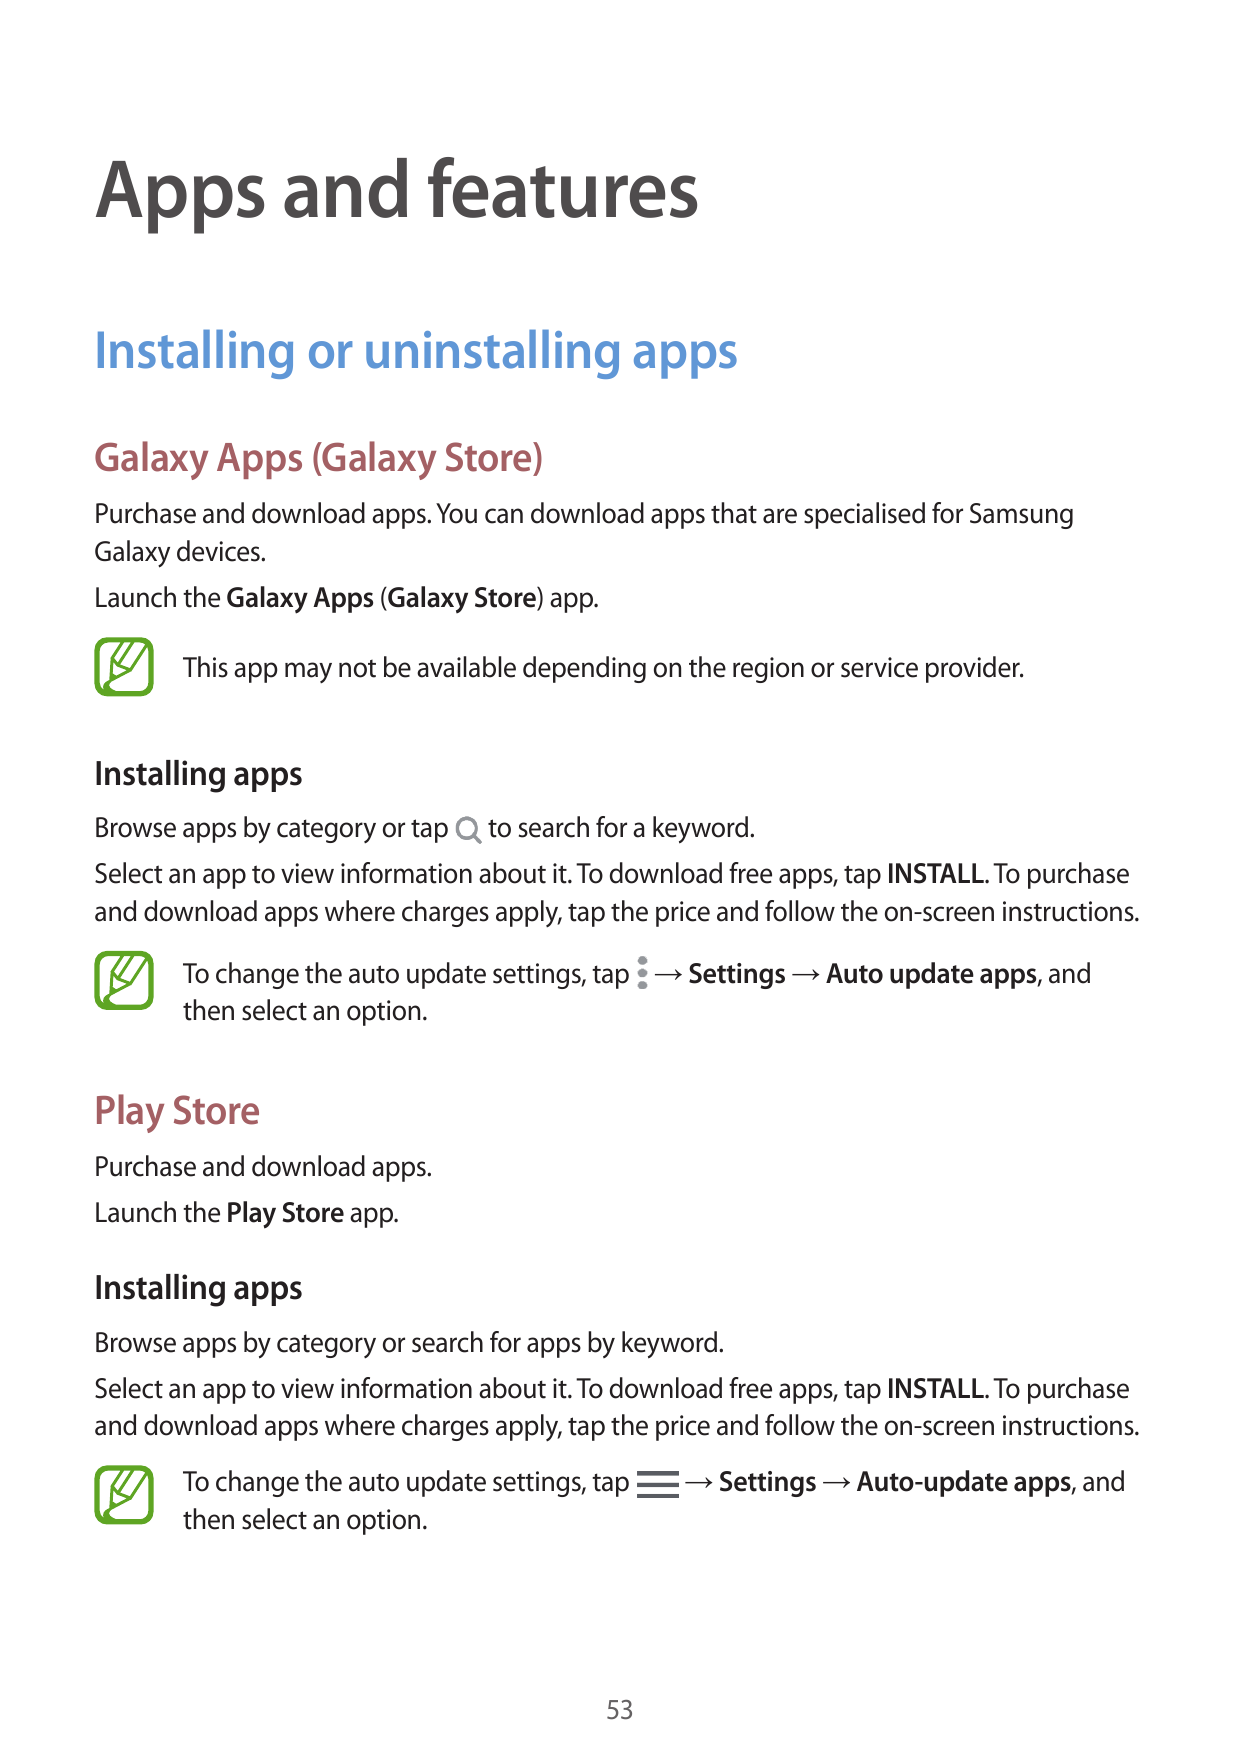 Apps and featuresInstalling or uninstalling appsGalaxy Apps (Galaxy Store)Purchase and download apps. You can download apps that